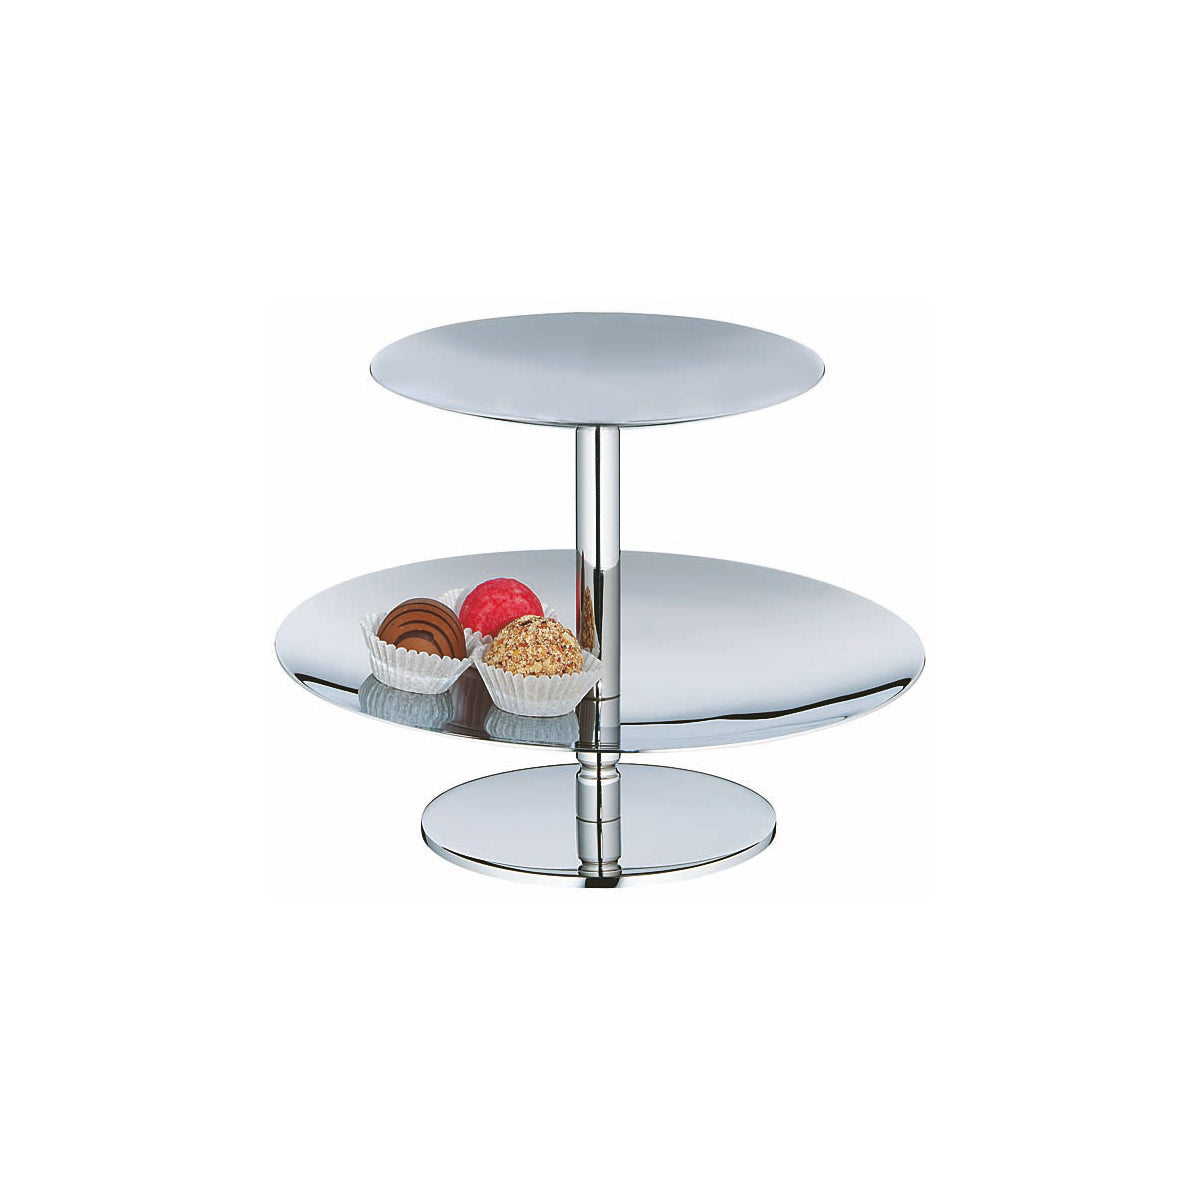 06.6903.6040 WMF Pure 3-Tier Pastry Stand 200x225mm Tomkin Australia Hospitality Supplies